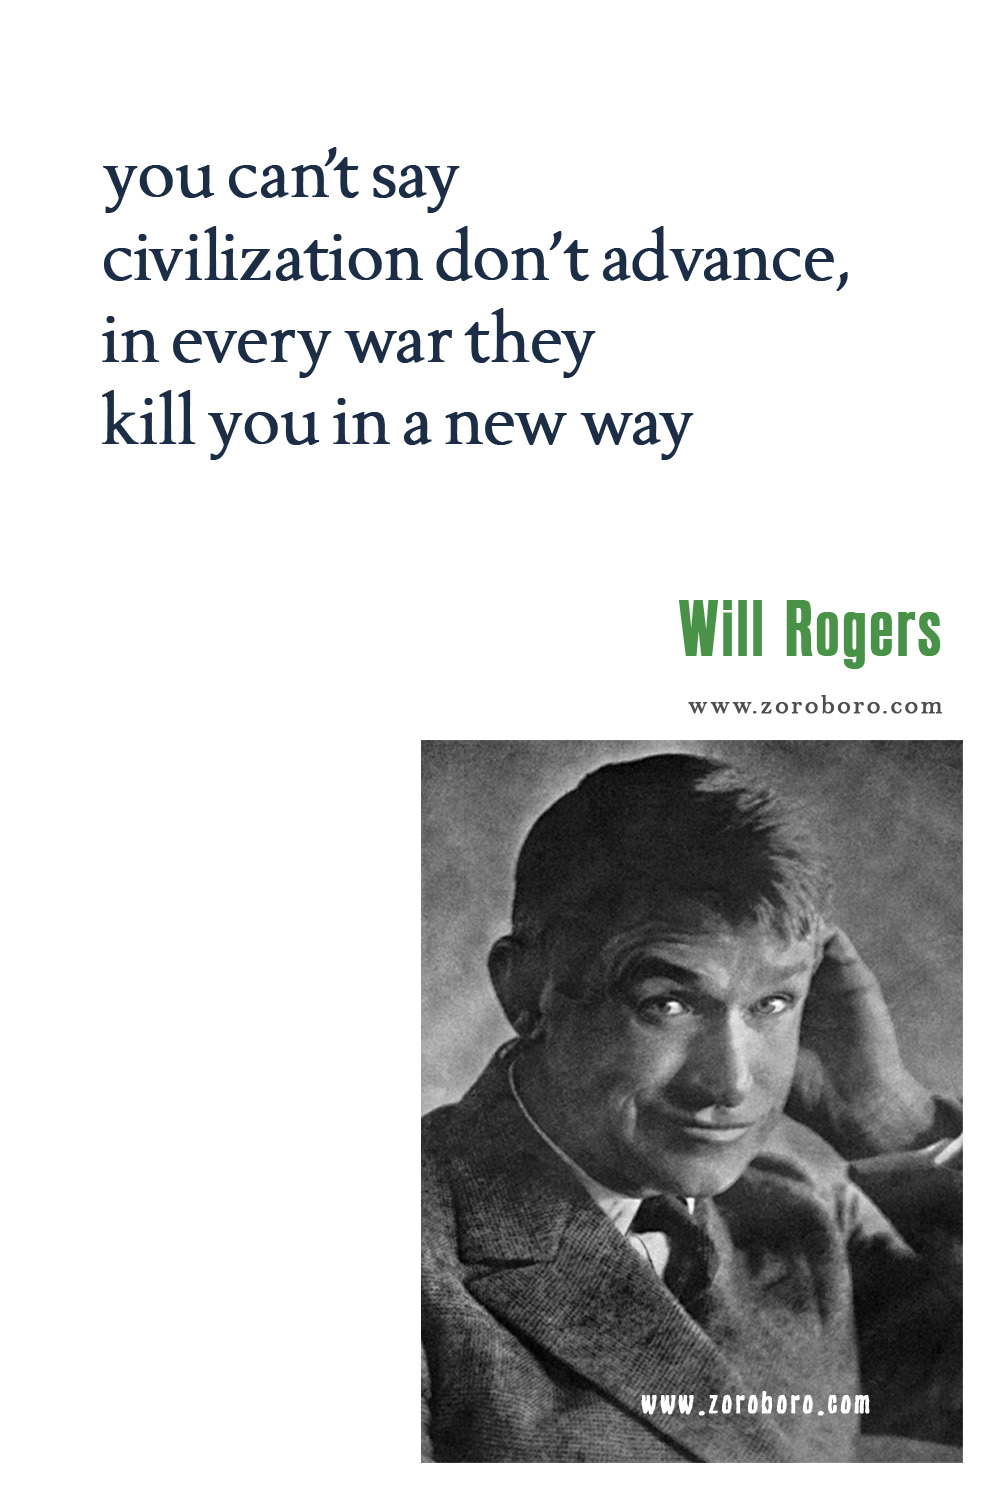 Will Rogers Quotes, Will Rogers Funny Quotes, Will Rogers Politics Humour Quotes, Will Rogers Comedian Quotes.